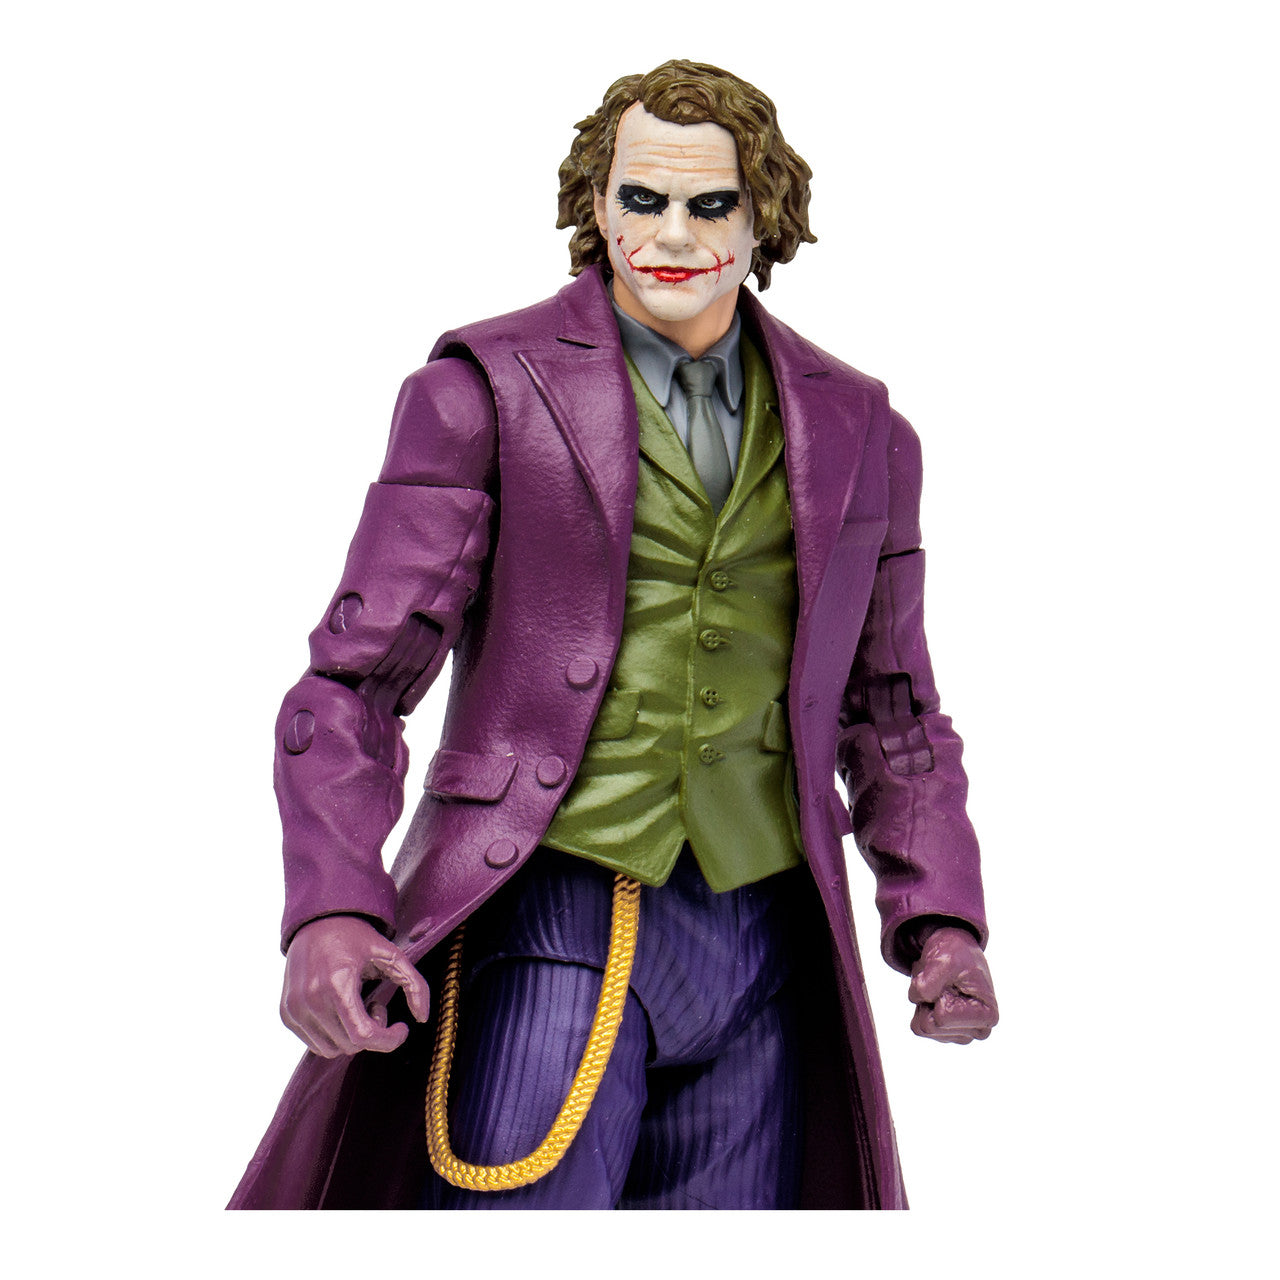 The Joker (The Dark Knight Trilogy) 7" Build-A-Figure Bane Series Action Figure by McFarlane Toys -McFarlane Toys - India - www.superherotoystore.com